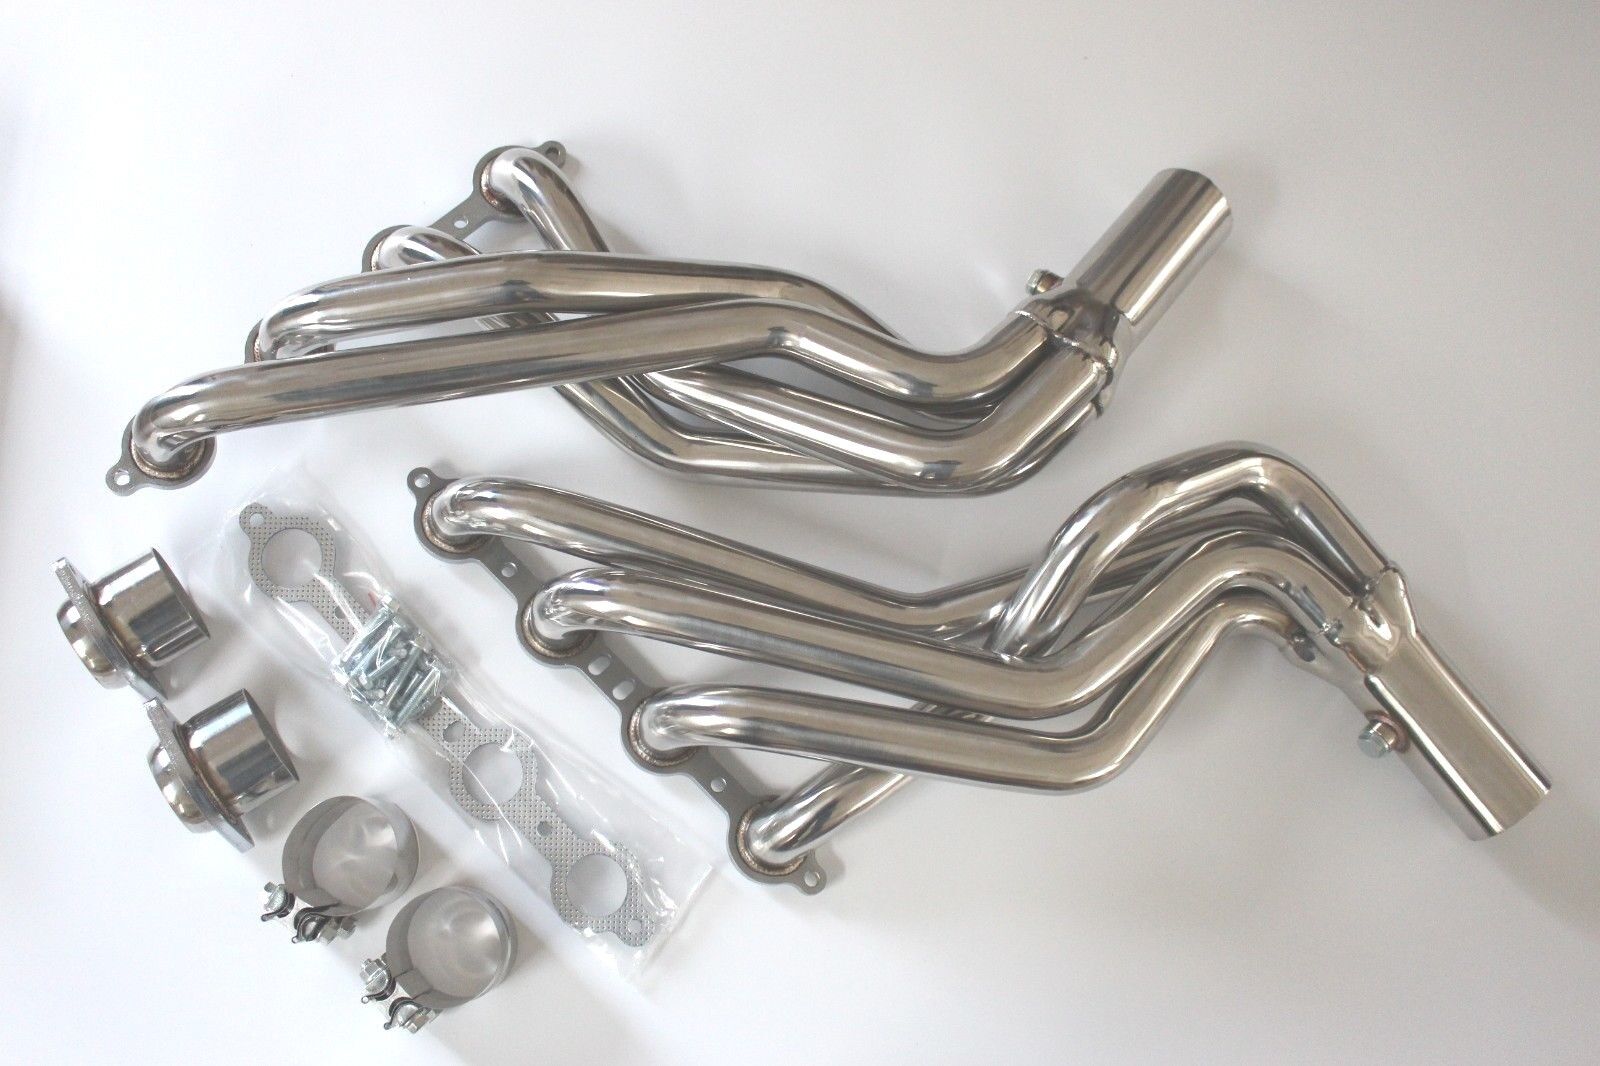  T304 Stainless Steel 4-1 Full Length Header for 04-07 Cadillac CTS 5.7/6.0 V8